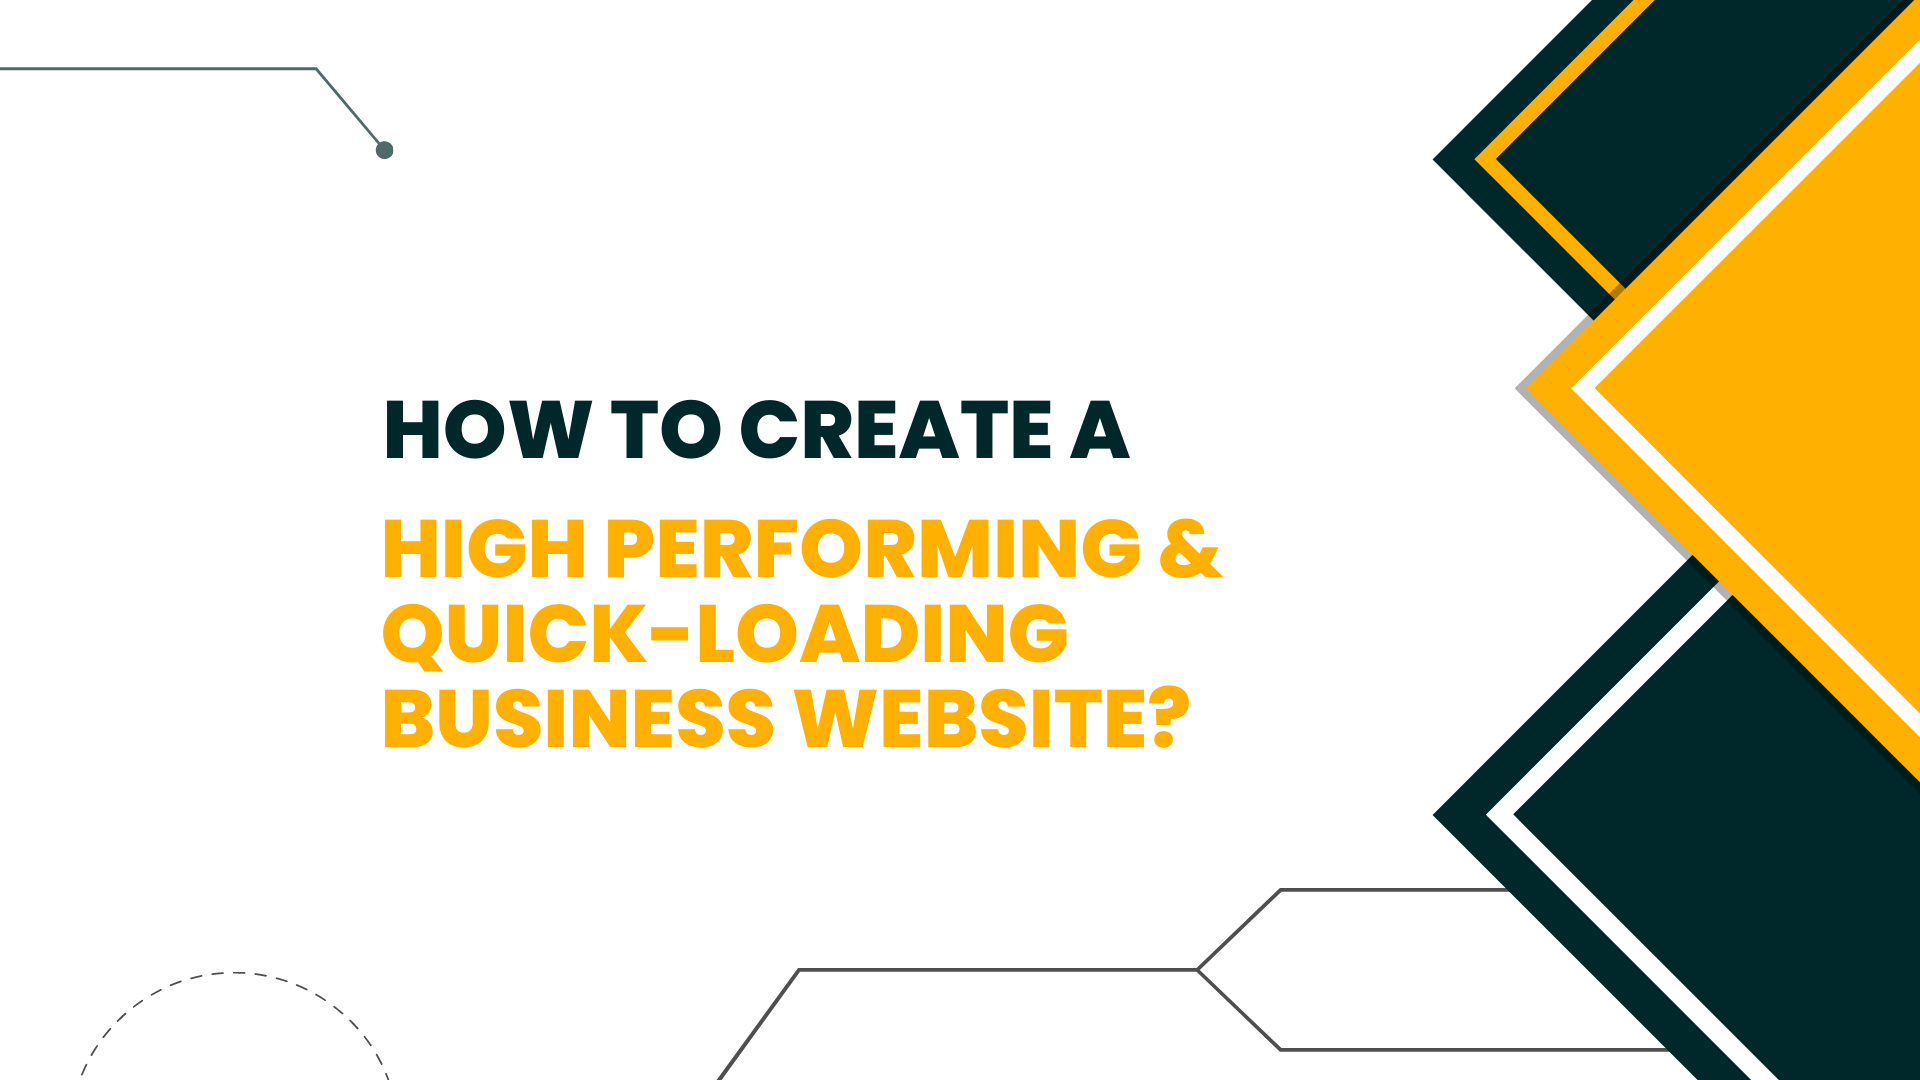 Building a high-performing business website: A guide